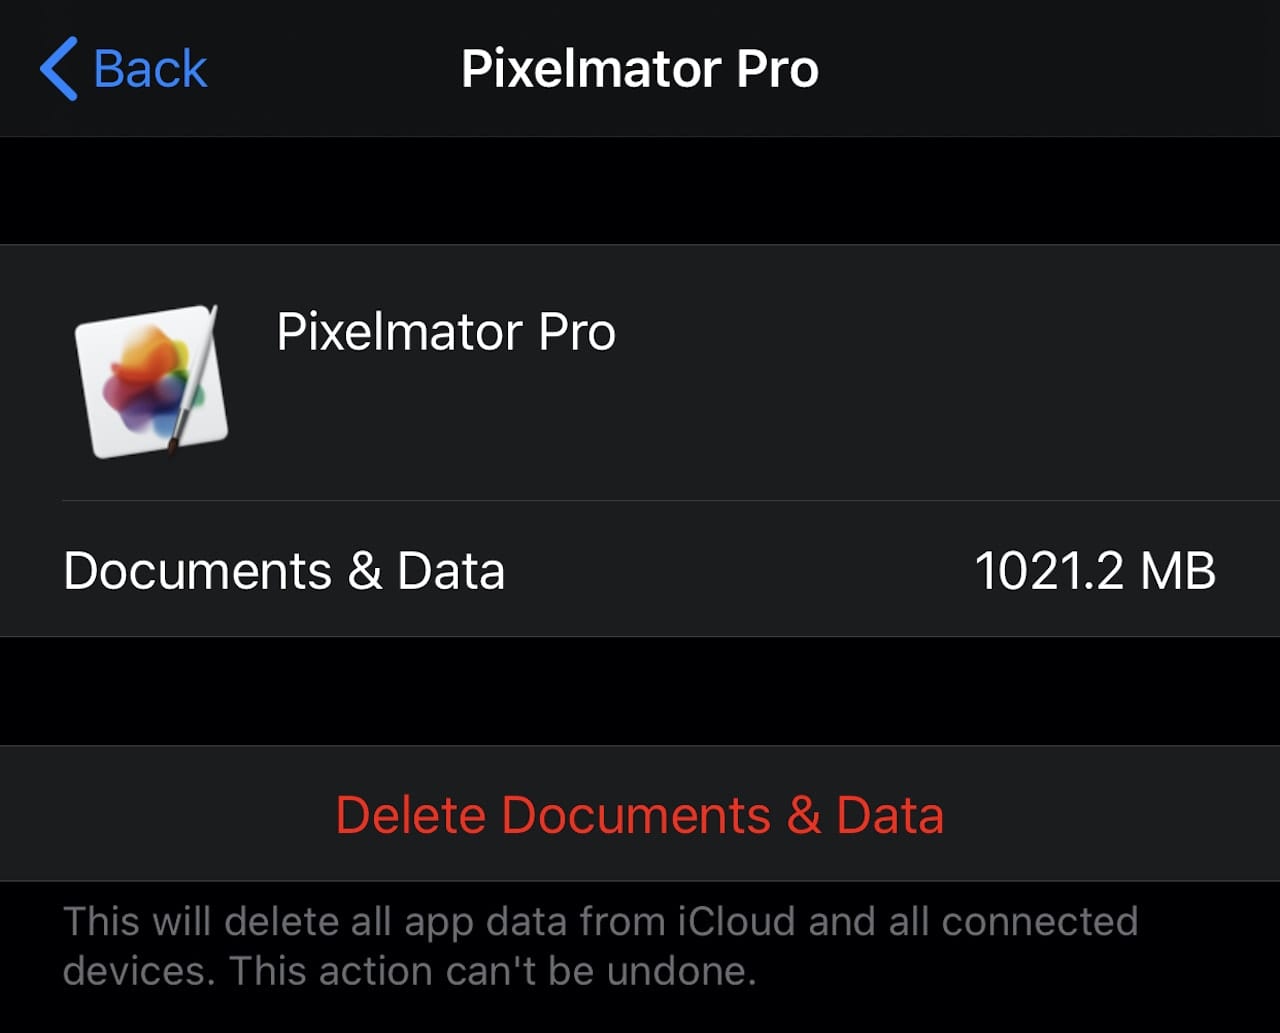 I'm no longer using this app very much, and deleting the documents and data can save almost  1GB of storage on iCloud. 